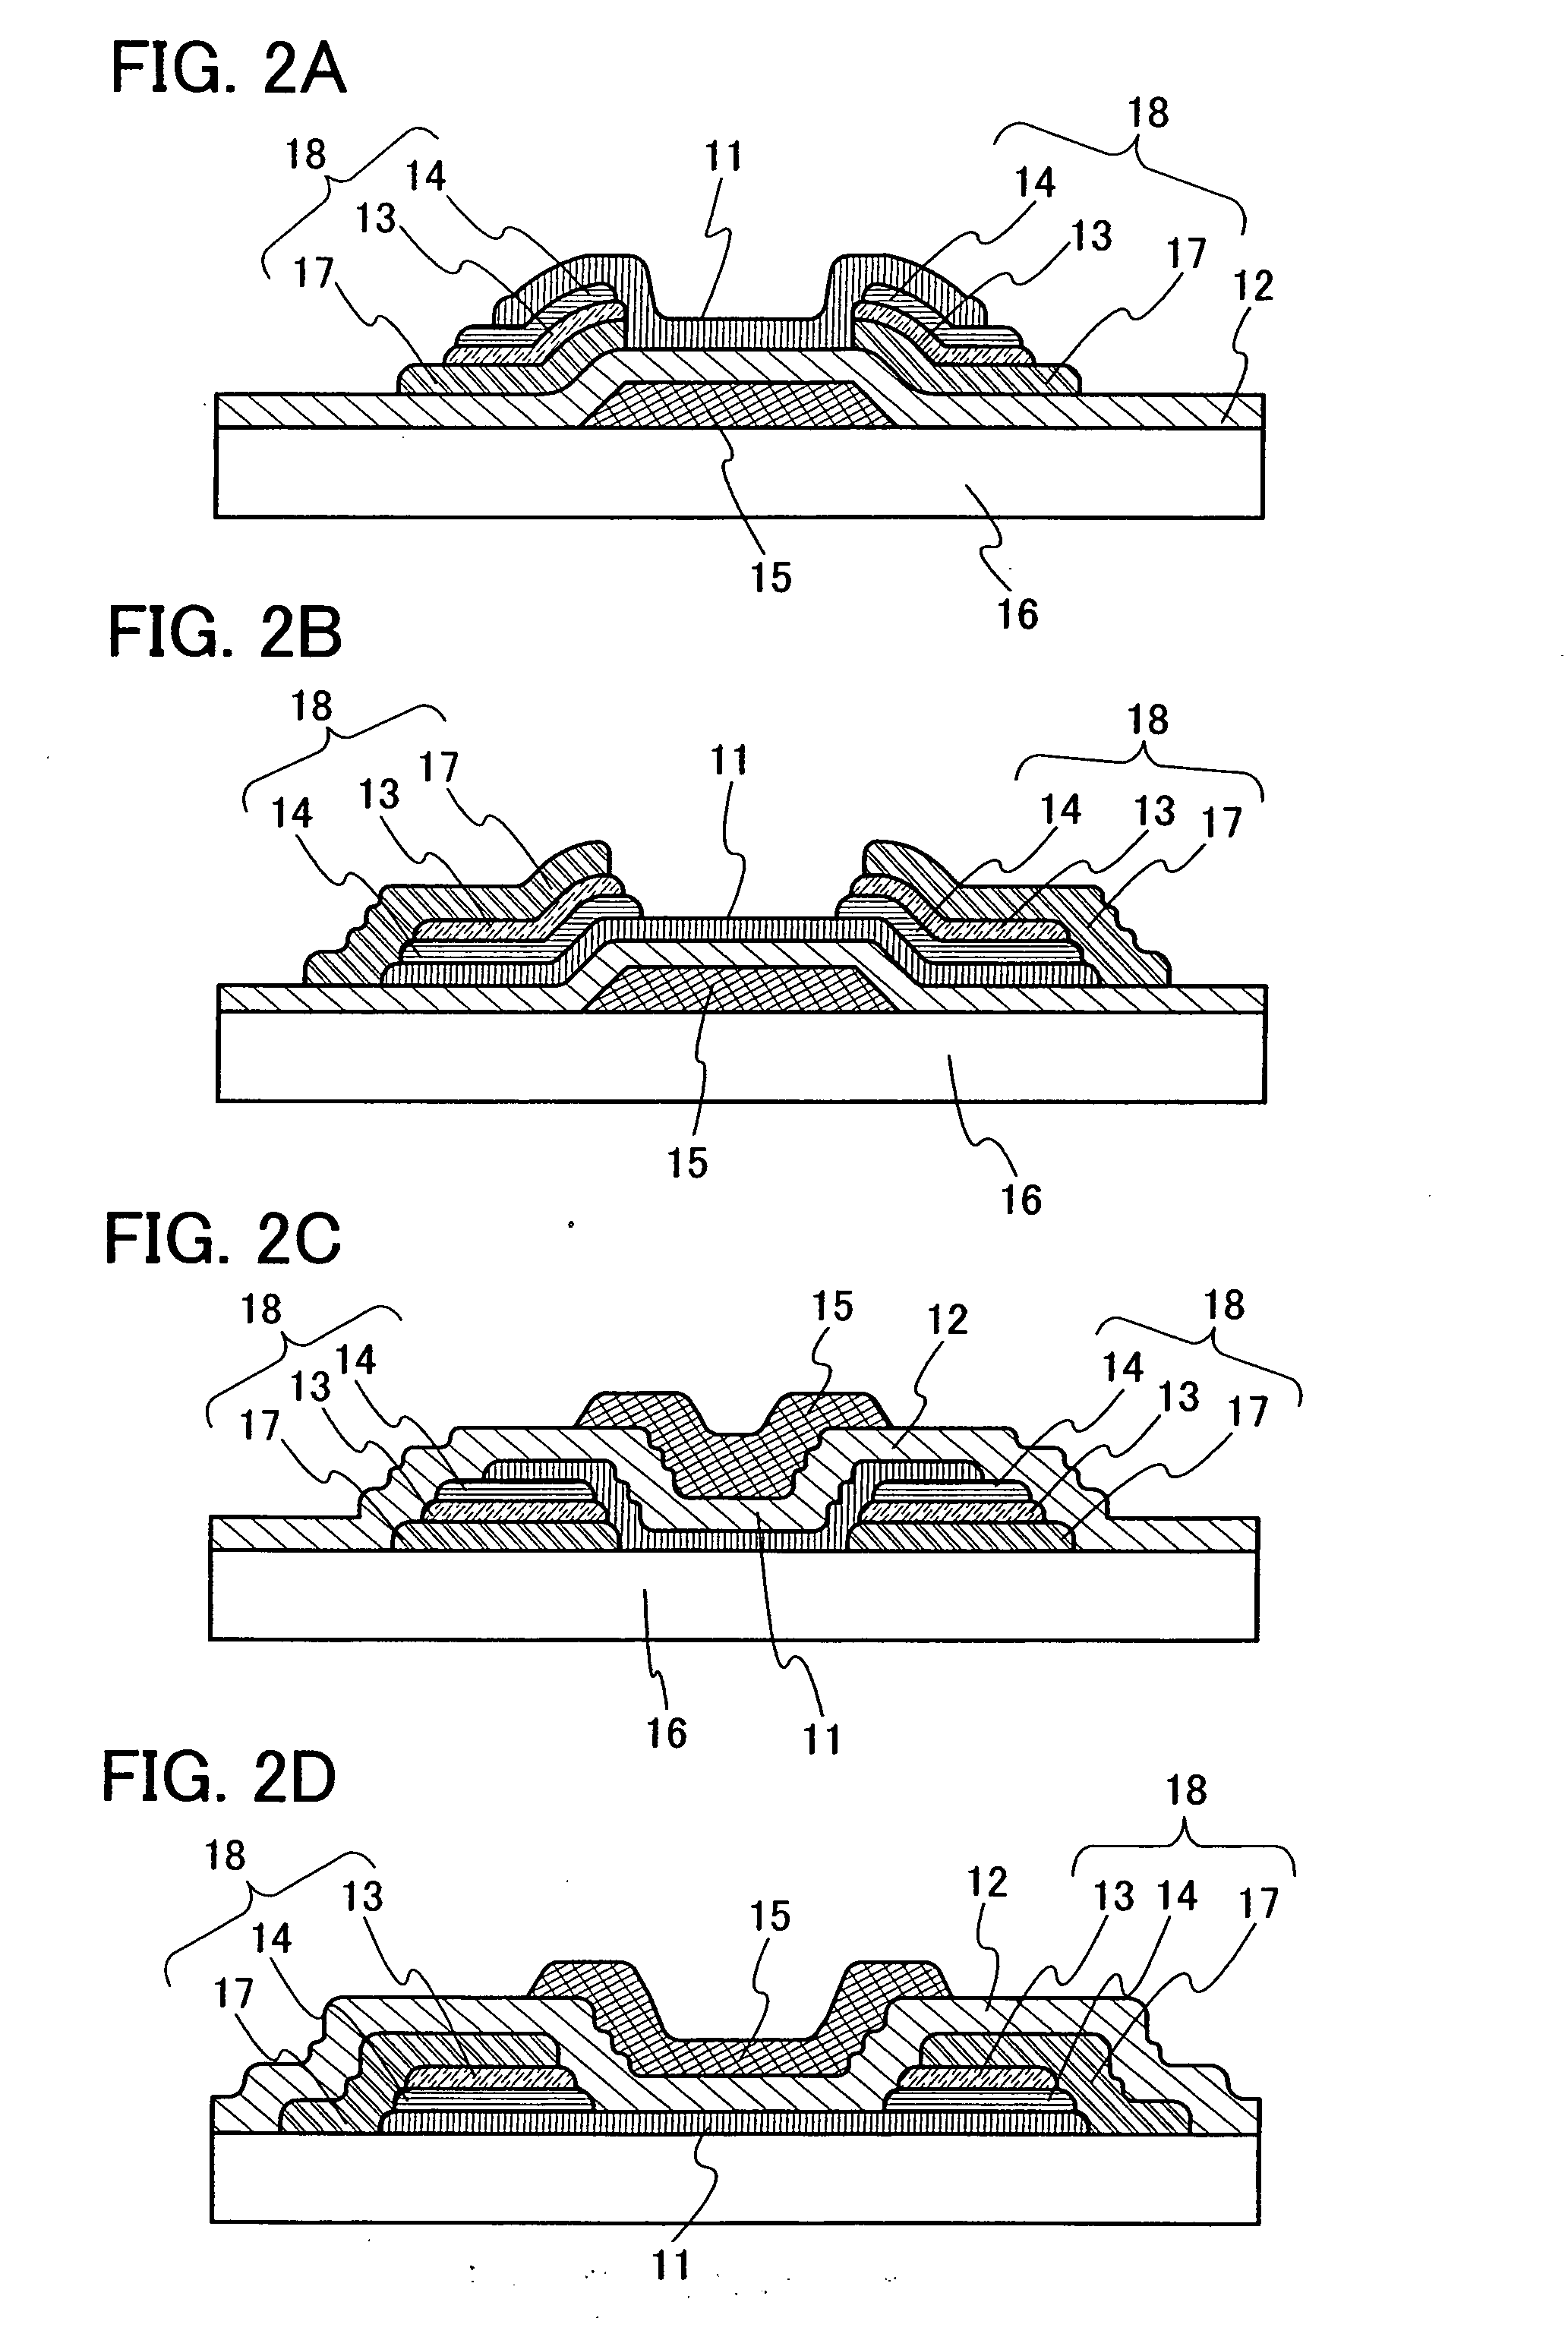 Organic field effect transistor and semiconductor device